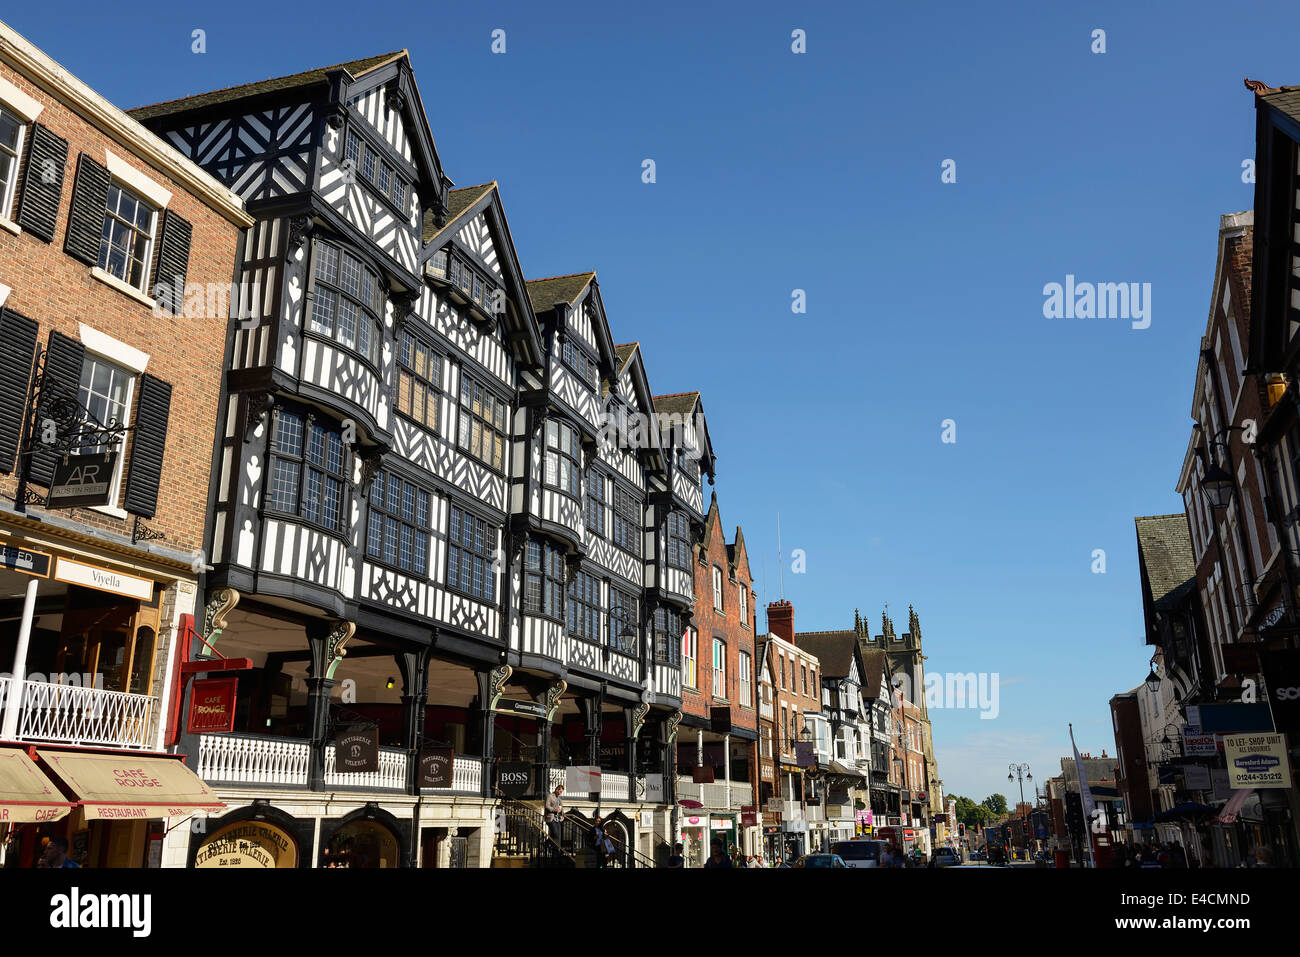 Black and white timber framed shops and buildings on Bridge Street in Chester city centre UK Stock Photo